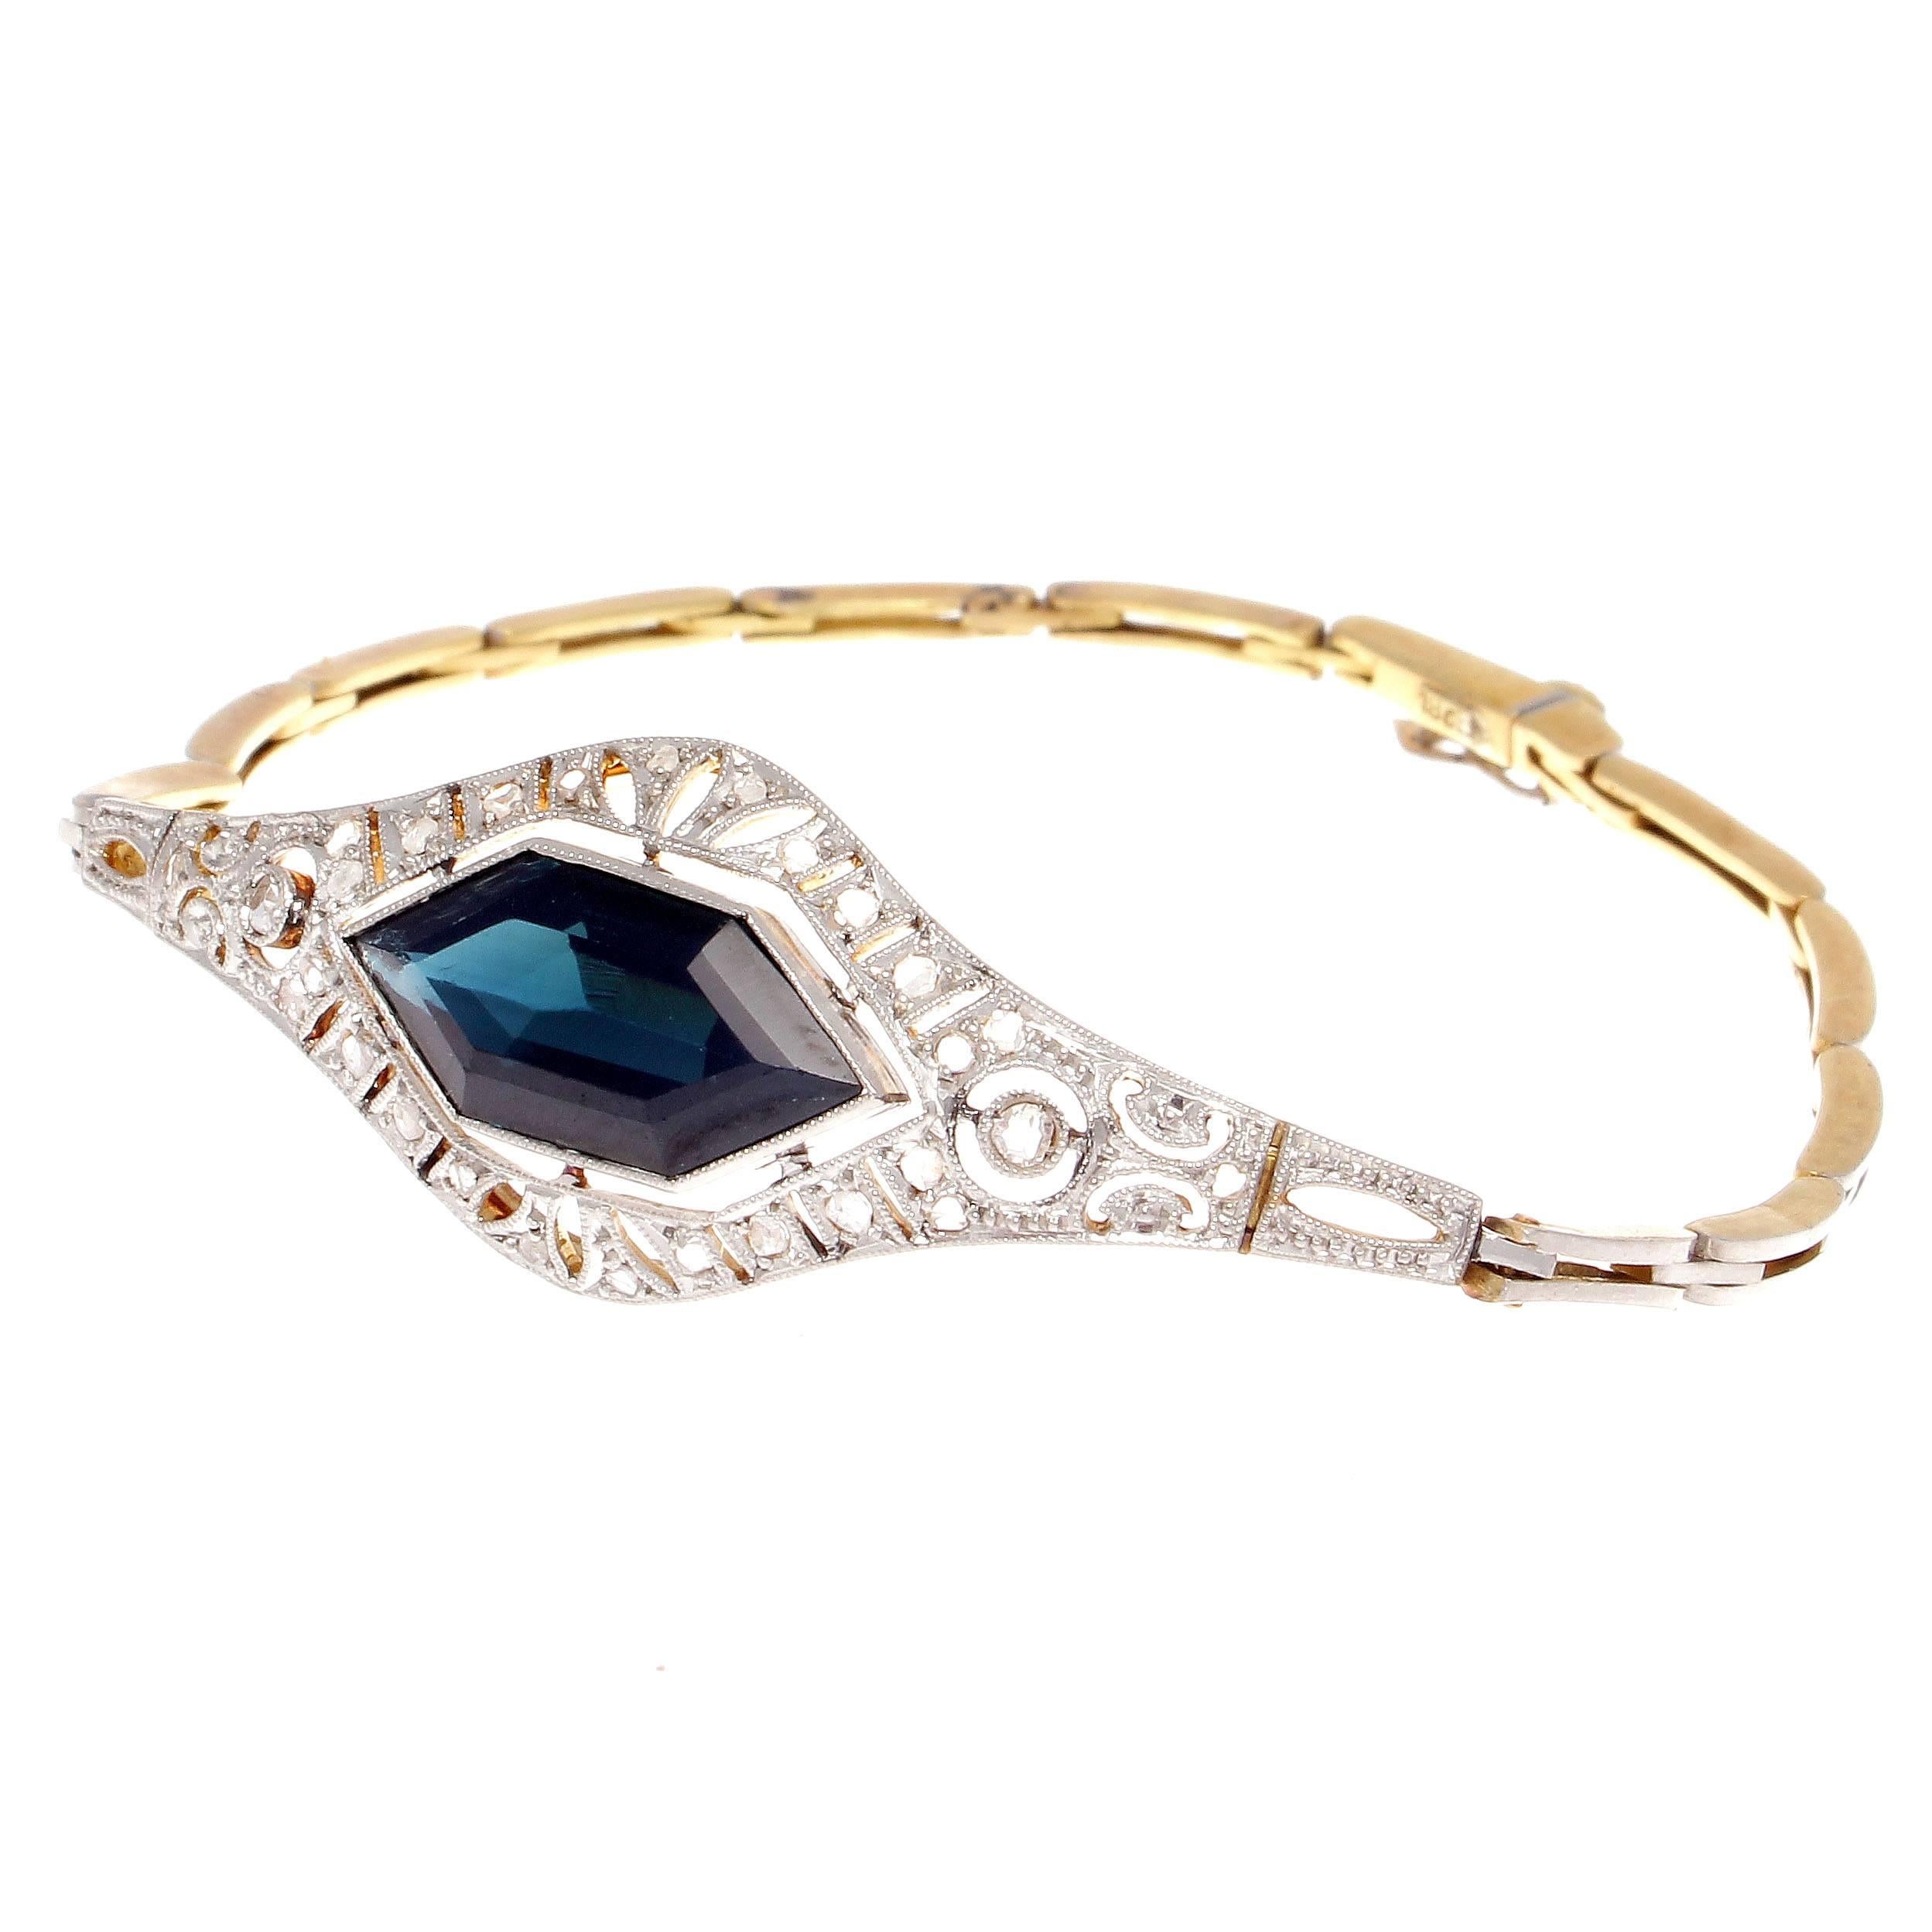 Embracing and producing everything that was beautiful during the Art Deco golden era of jewelry.  Featuring a specialty cut deep navy blue sapphire that is approximately 4.50 carats thoughtfully surrounded by perfectly placed old cut diamonds. Hand